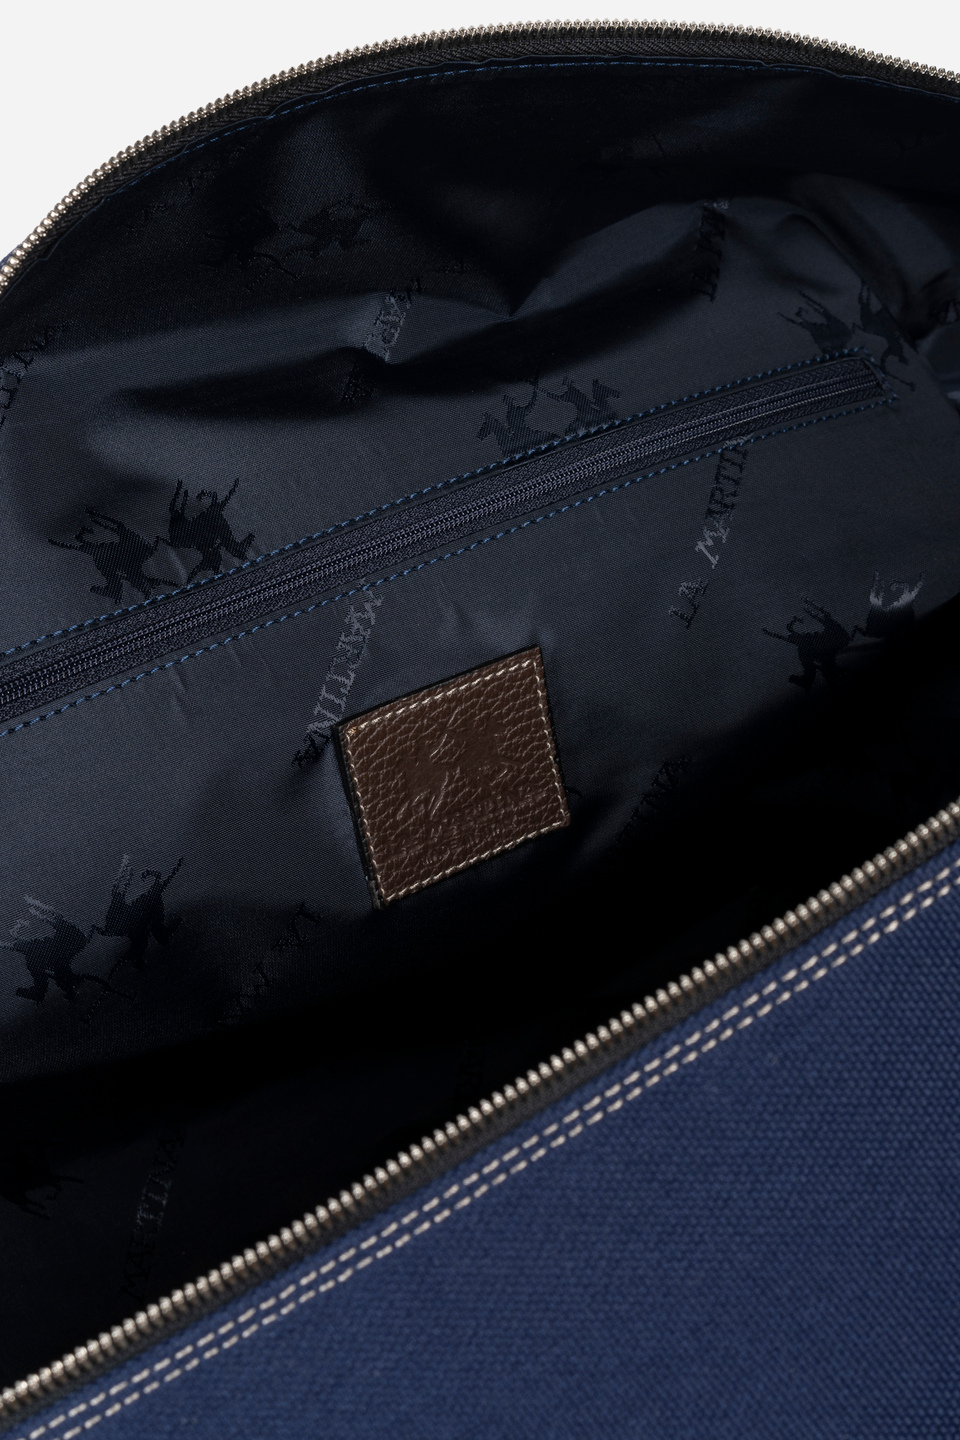 Cotton duffle bag with leather inserts | La Martina - Official Online Shop